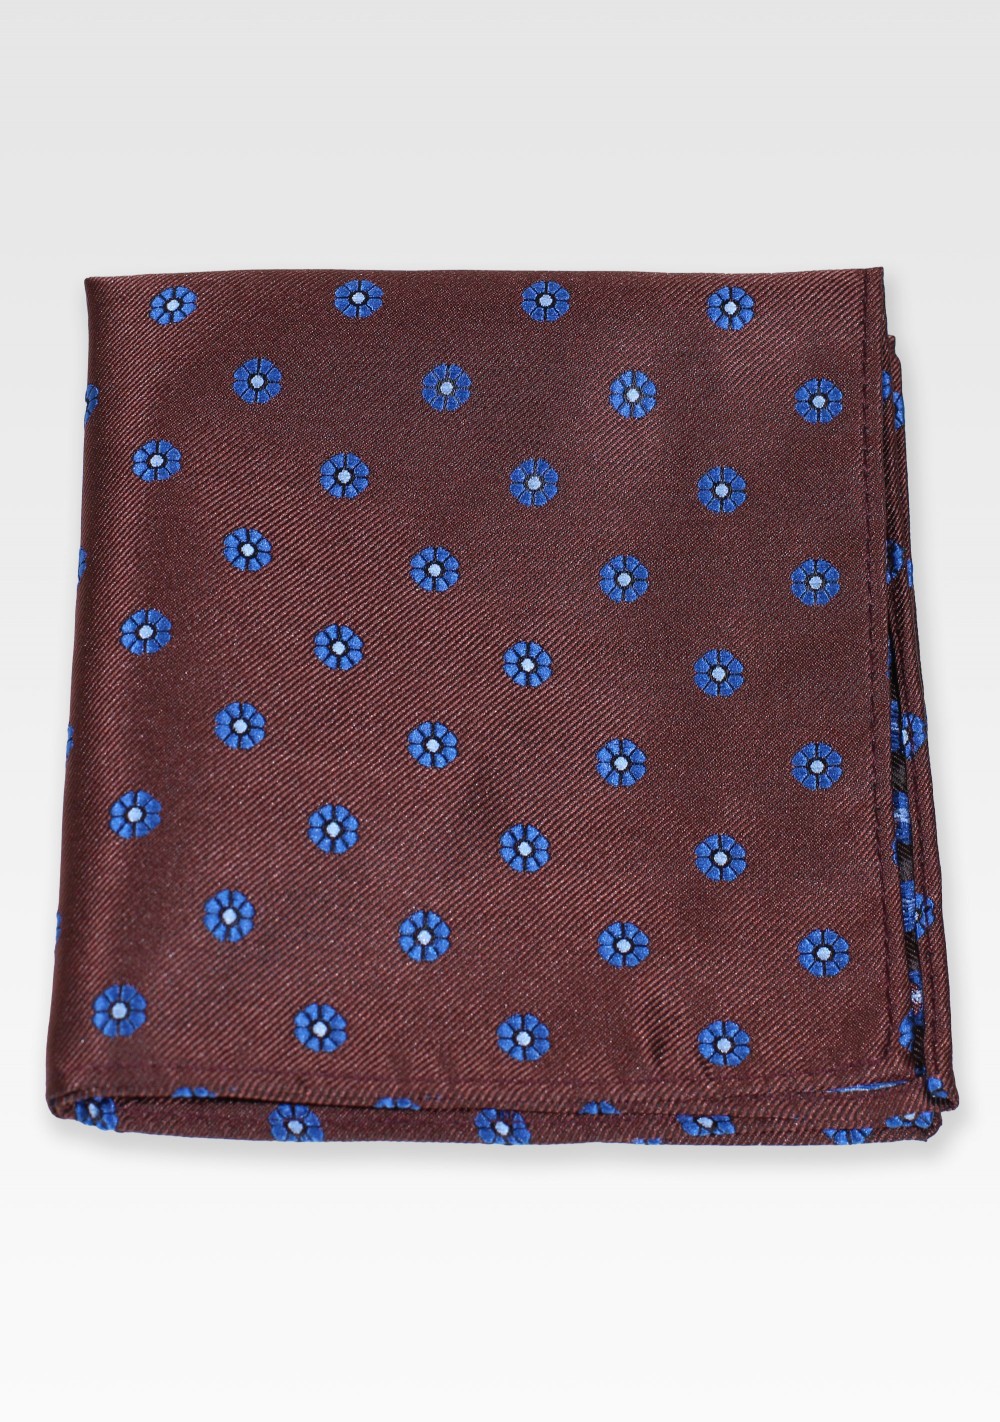 Brown and Navy Floral Pocket Square